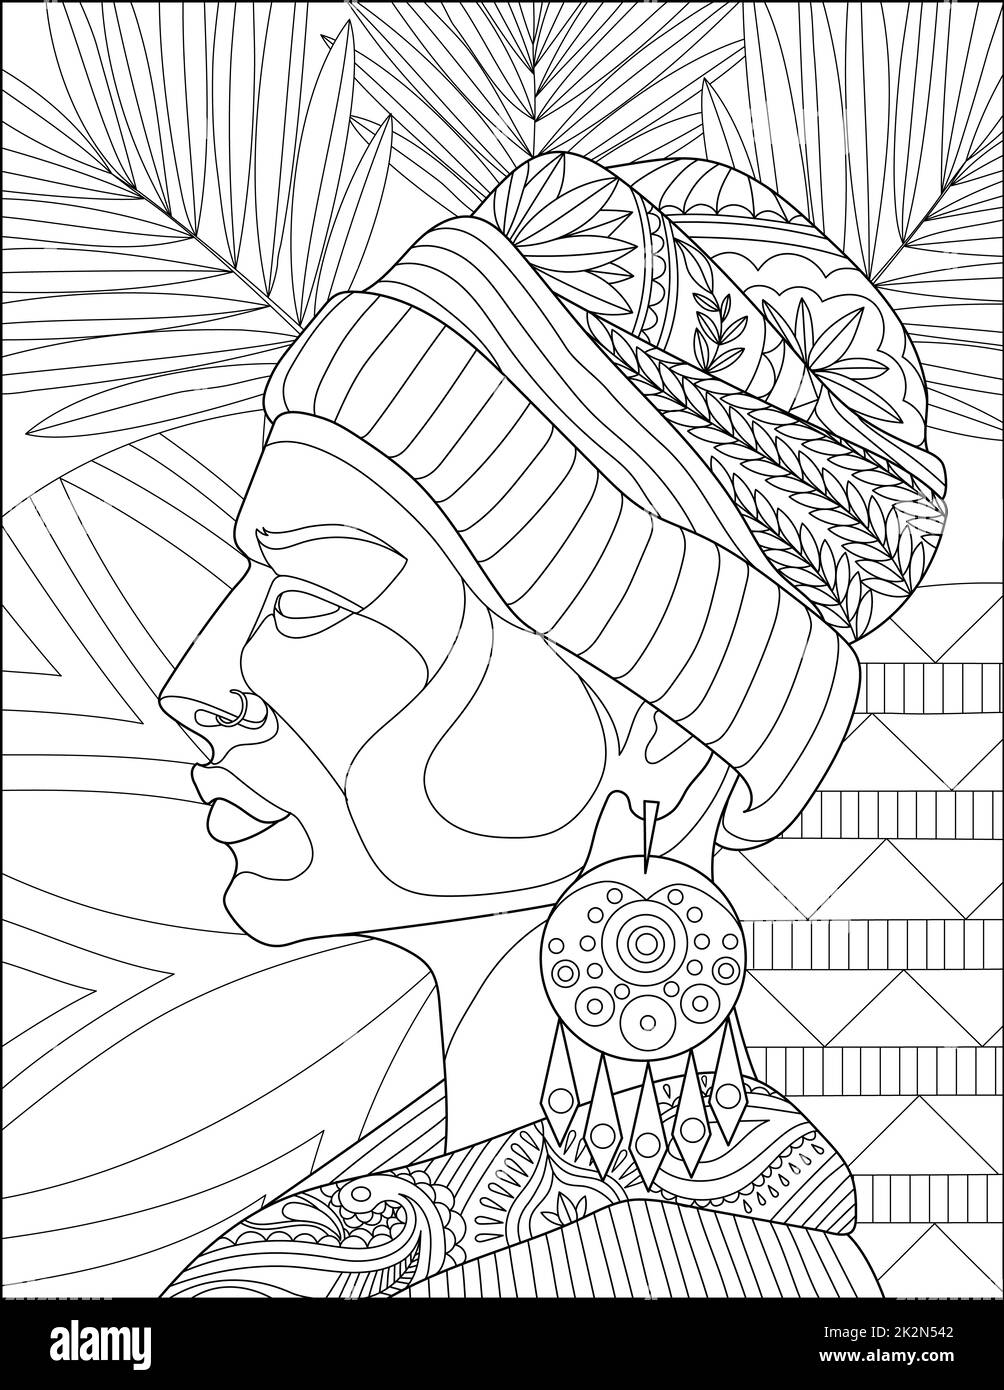 Vector line drawing stylized girl elaborate decorated hat earrings. Digital lineart image woman floral decorations background. Outline artwork design lady foliage patterned. Stock Photo